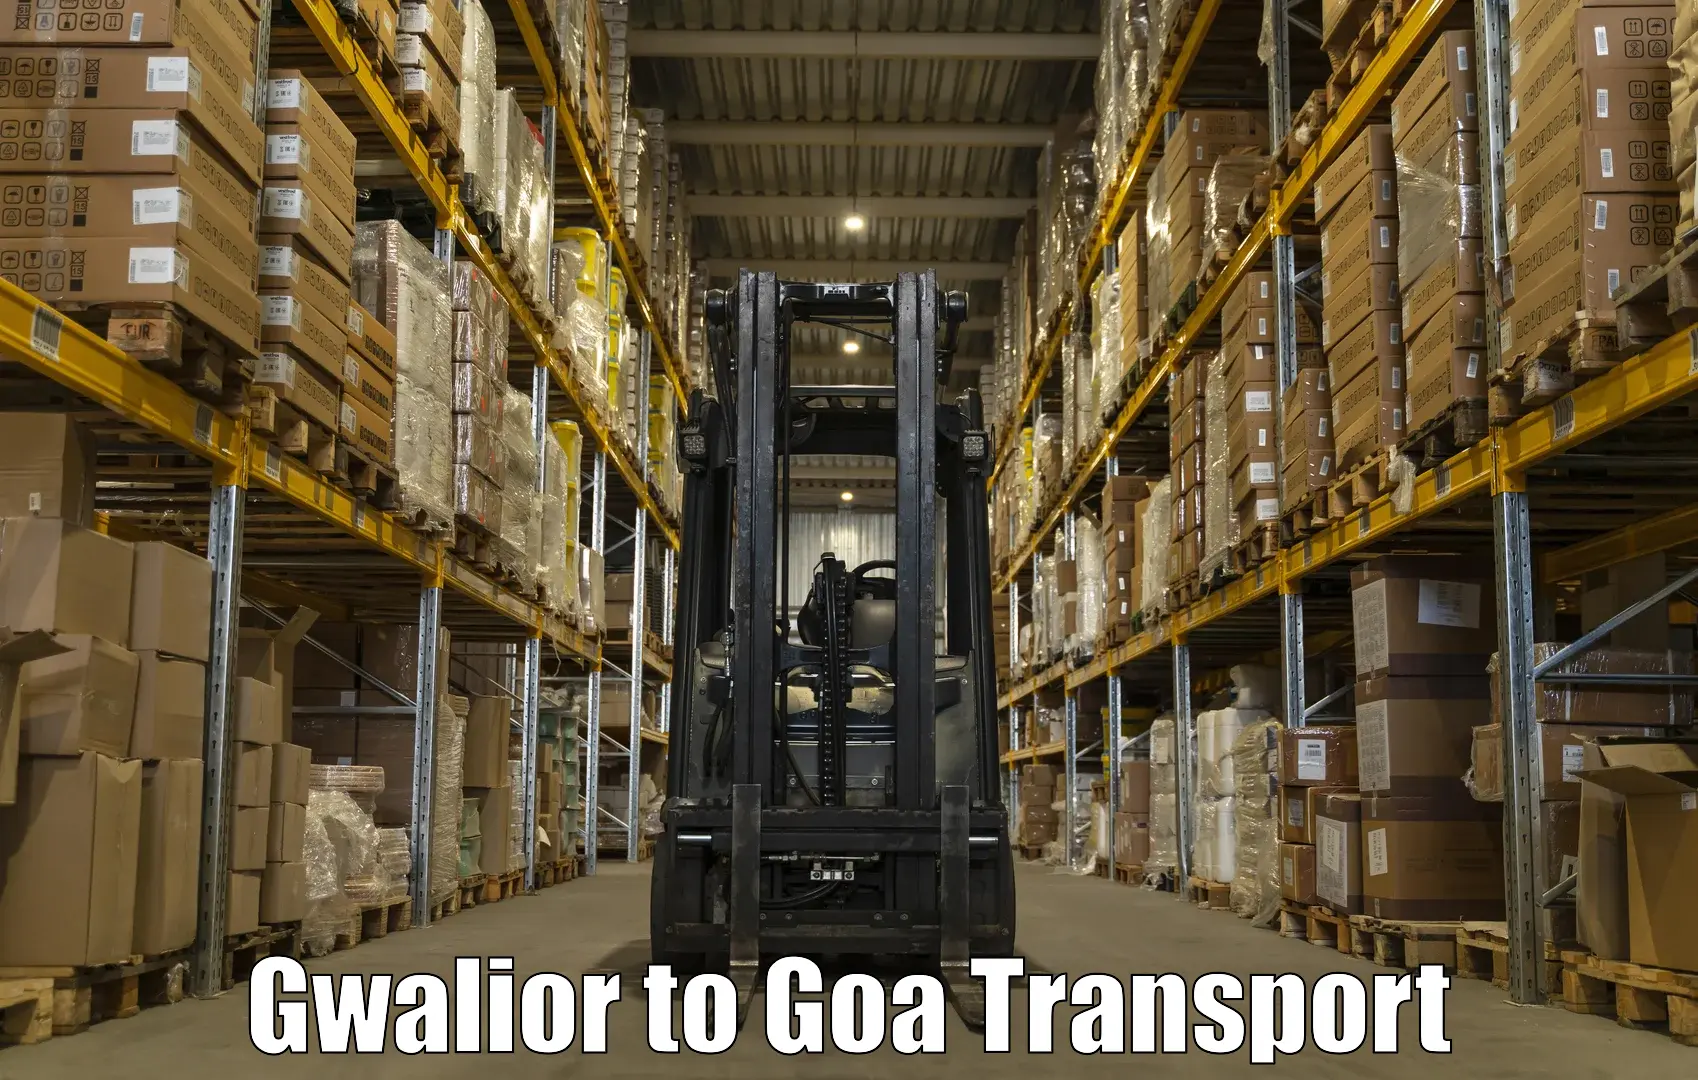 Cycle transportation service Gwalior to Goa